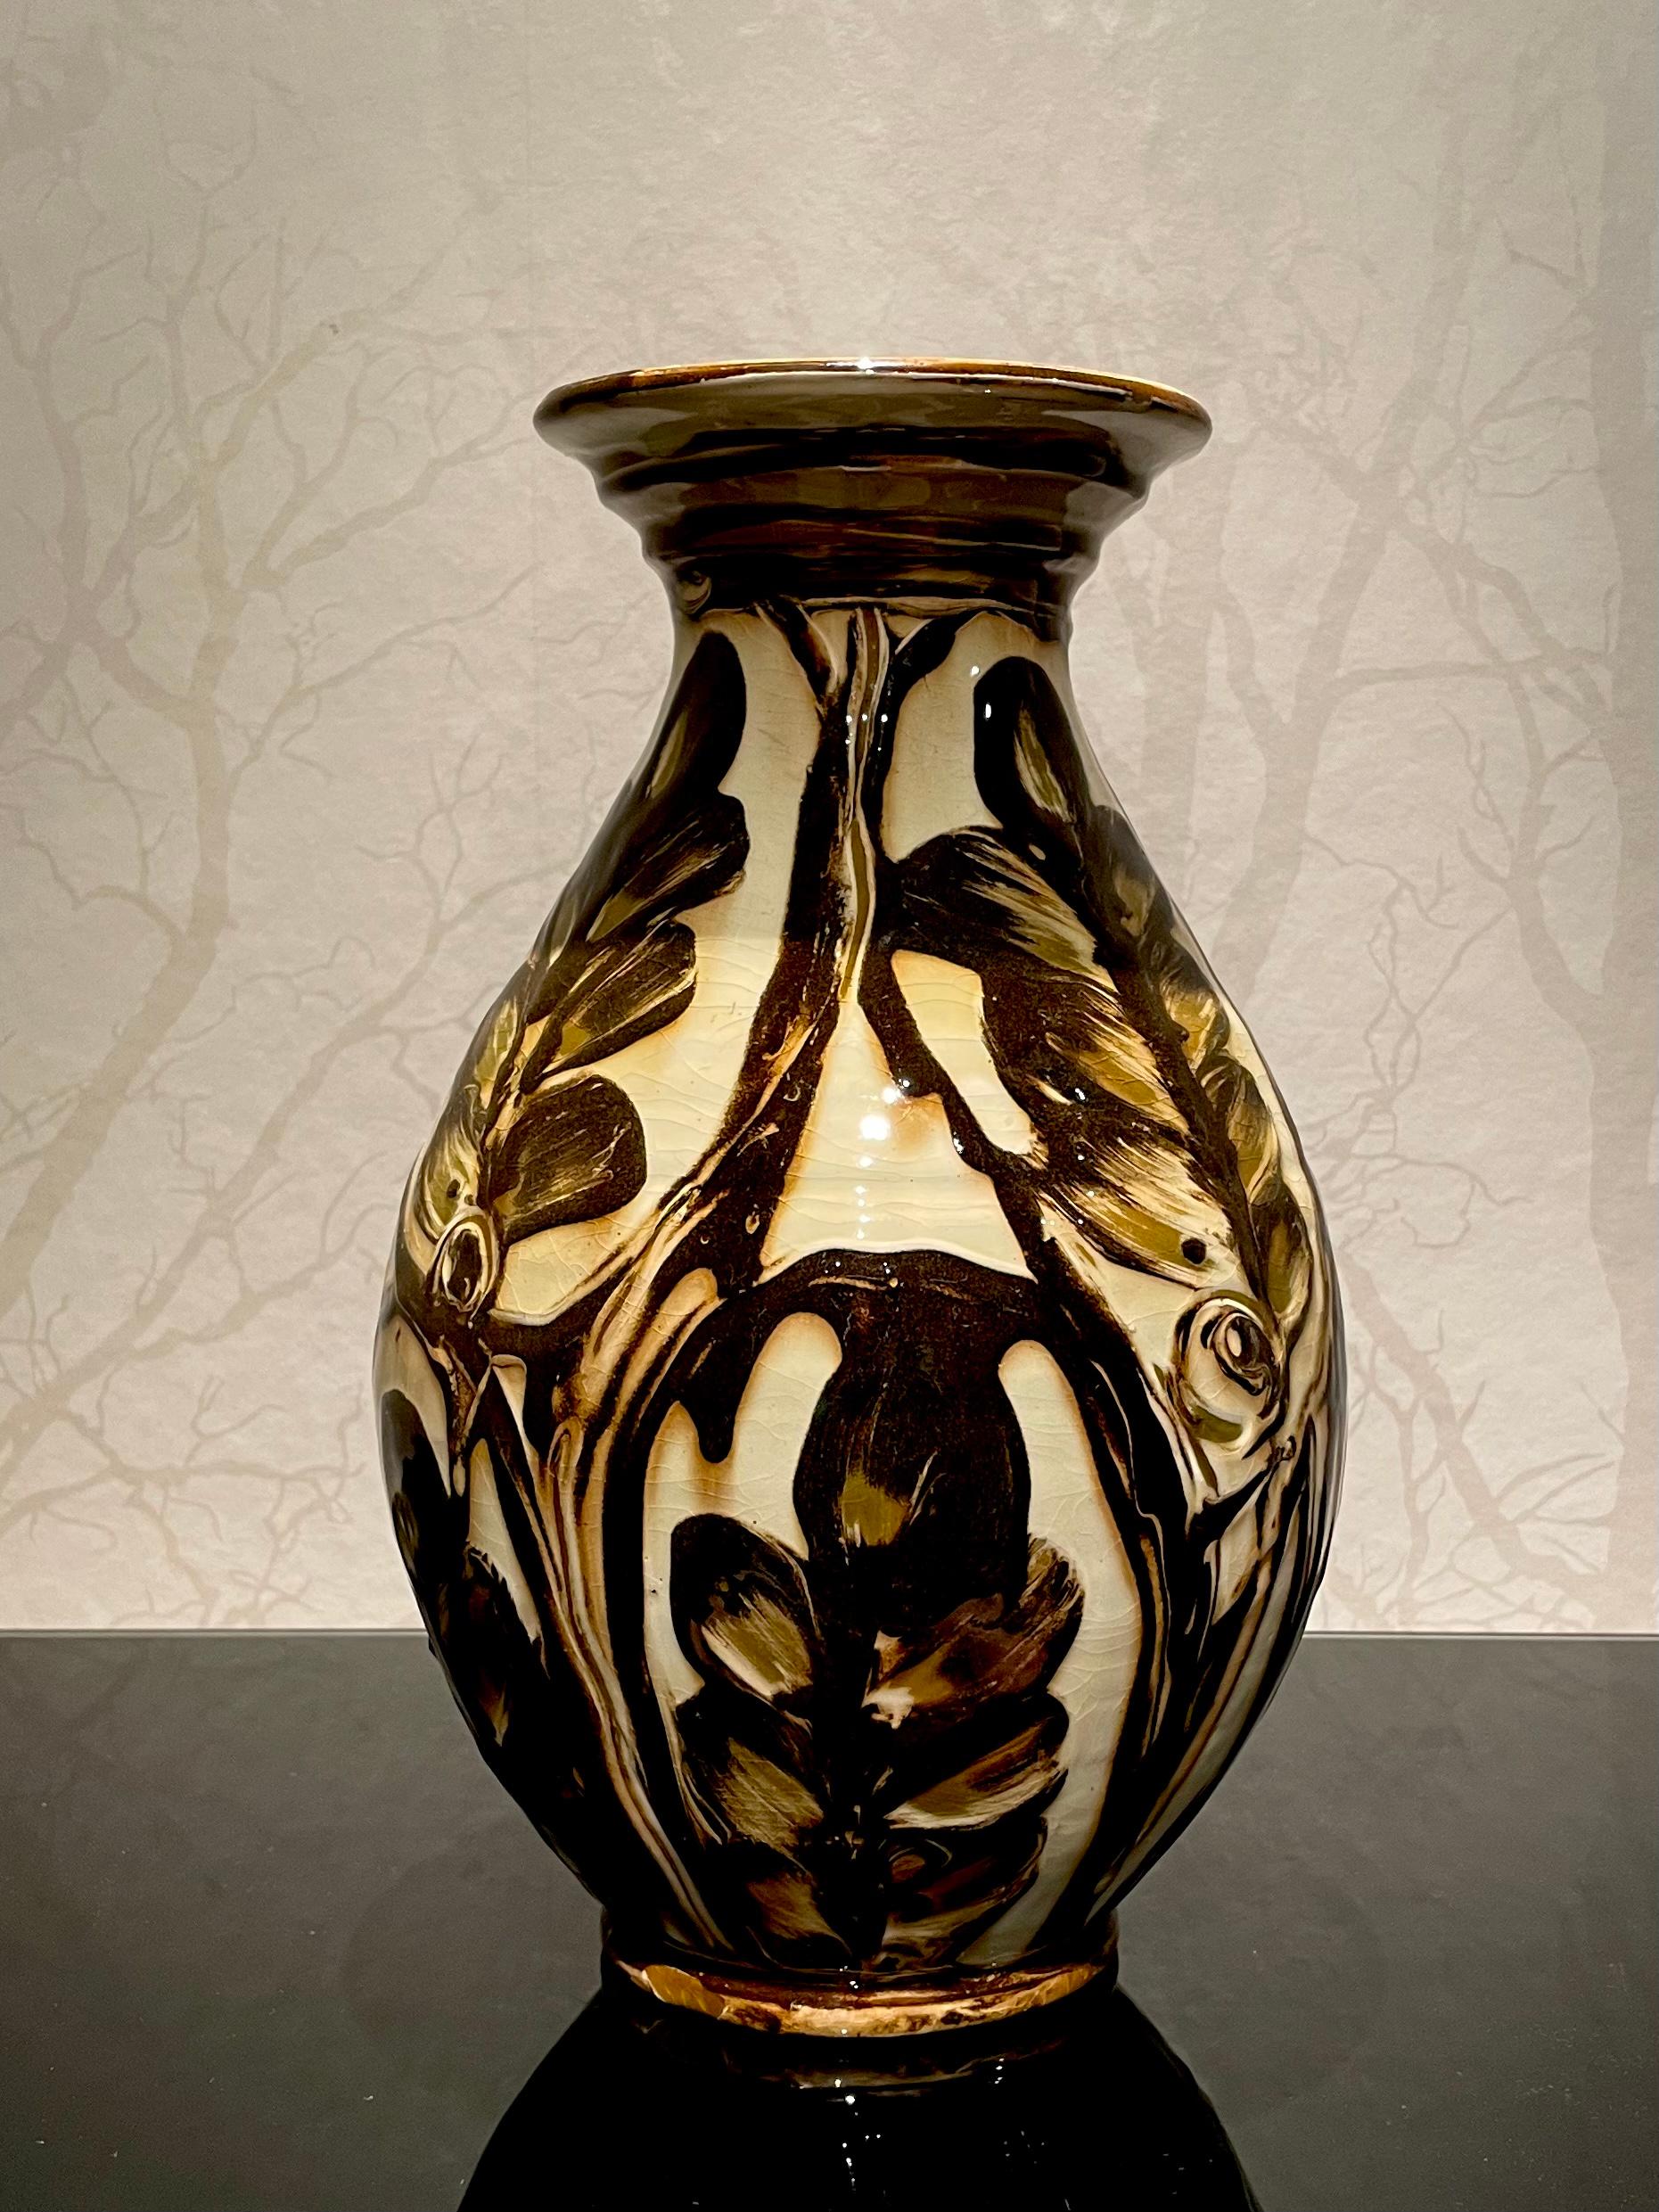 This is the 1920s Danish xx cm high ceramic vase by Herman Kähler. 
It comes with a baluster shaped body, high glossy surface and warm, very deep brown and green color on a cream white base. 

The pattern, consisting of branches and leaves, creates